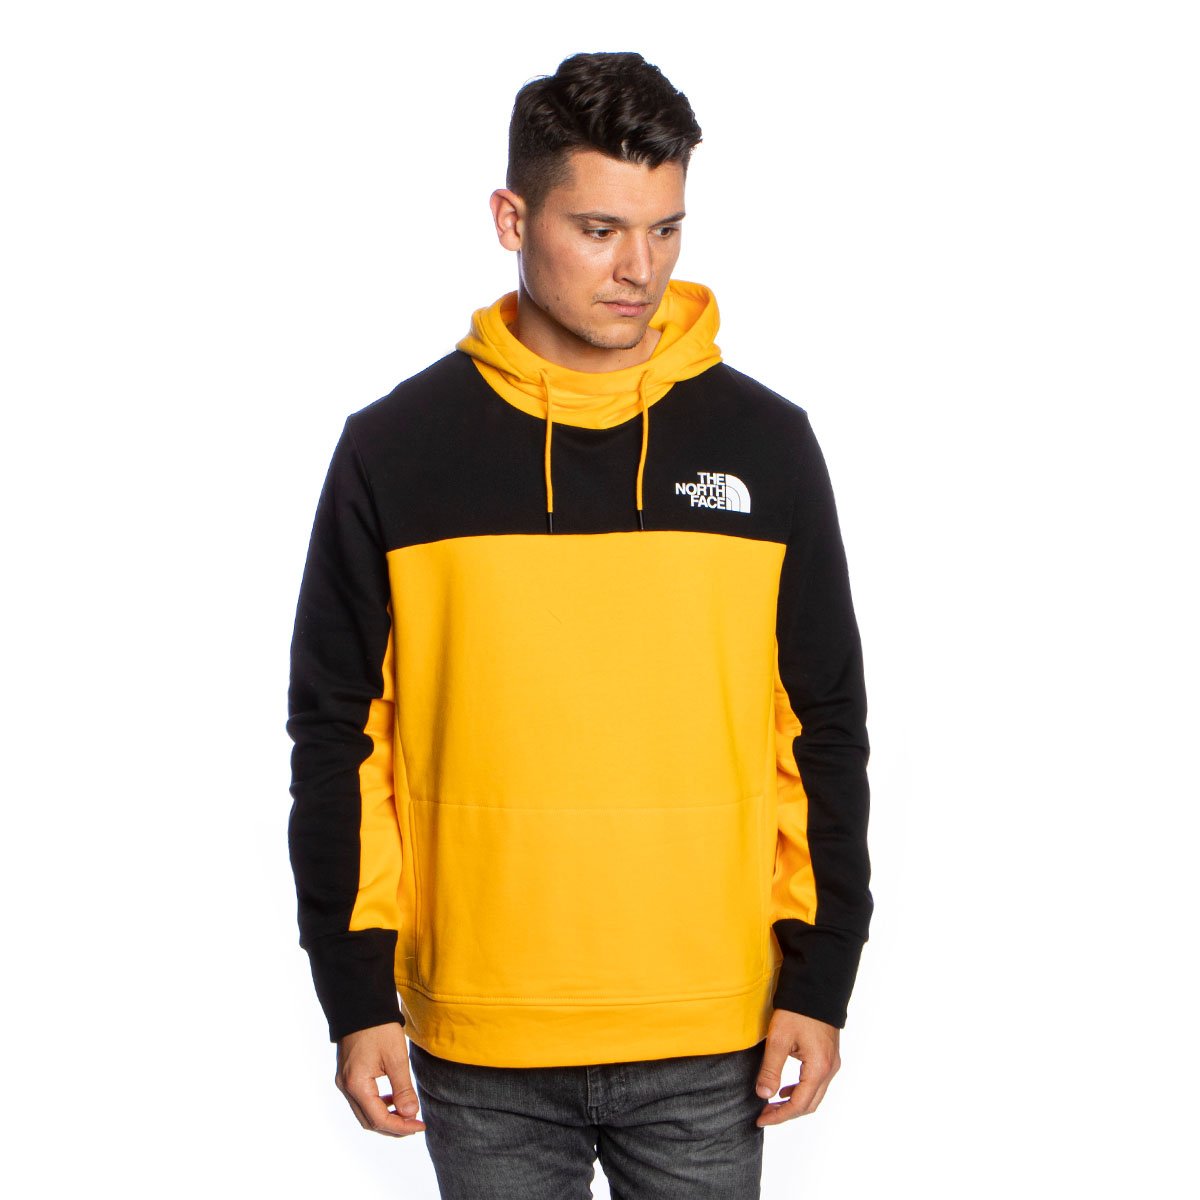 north face black and gold hoodie